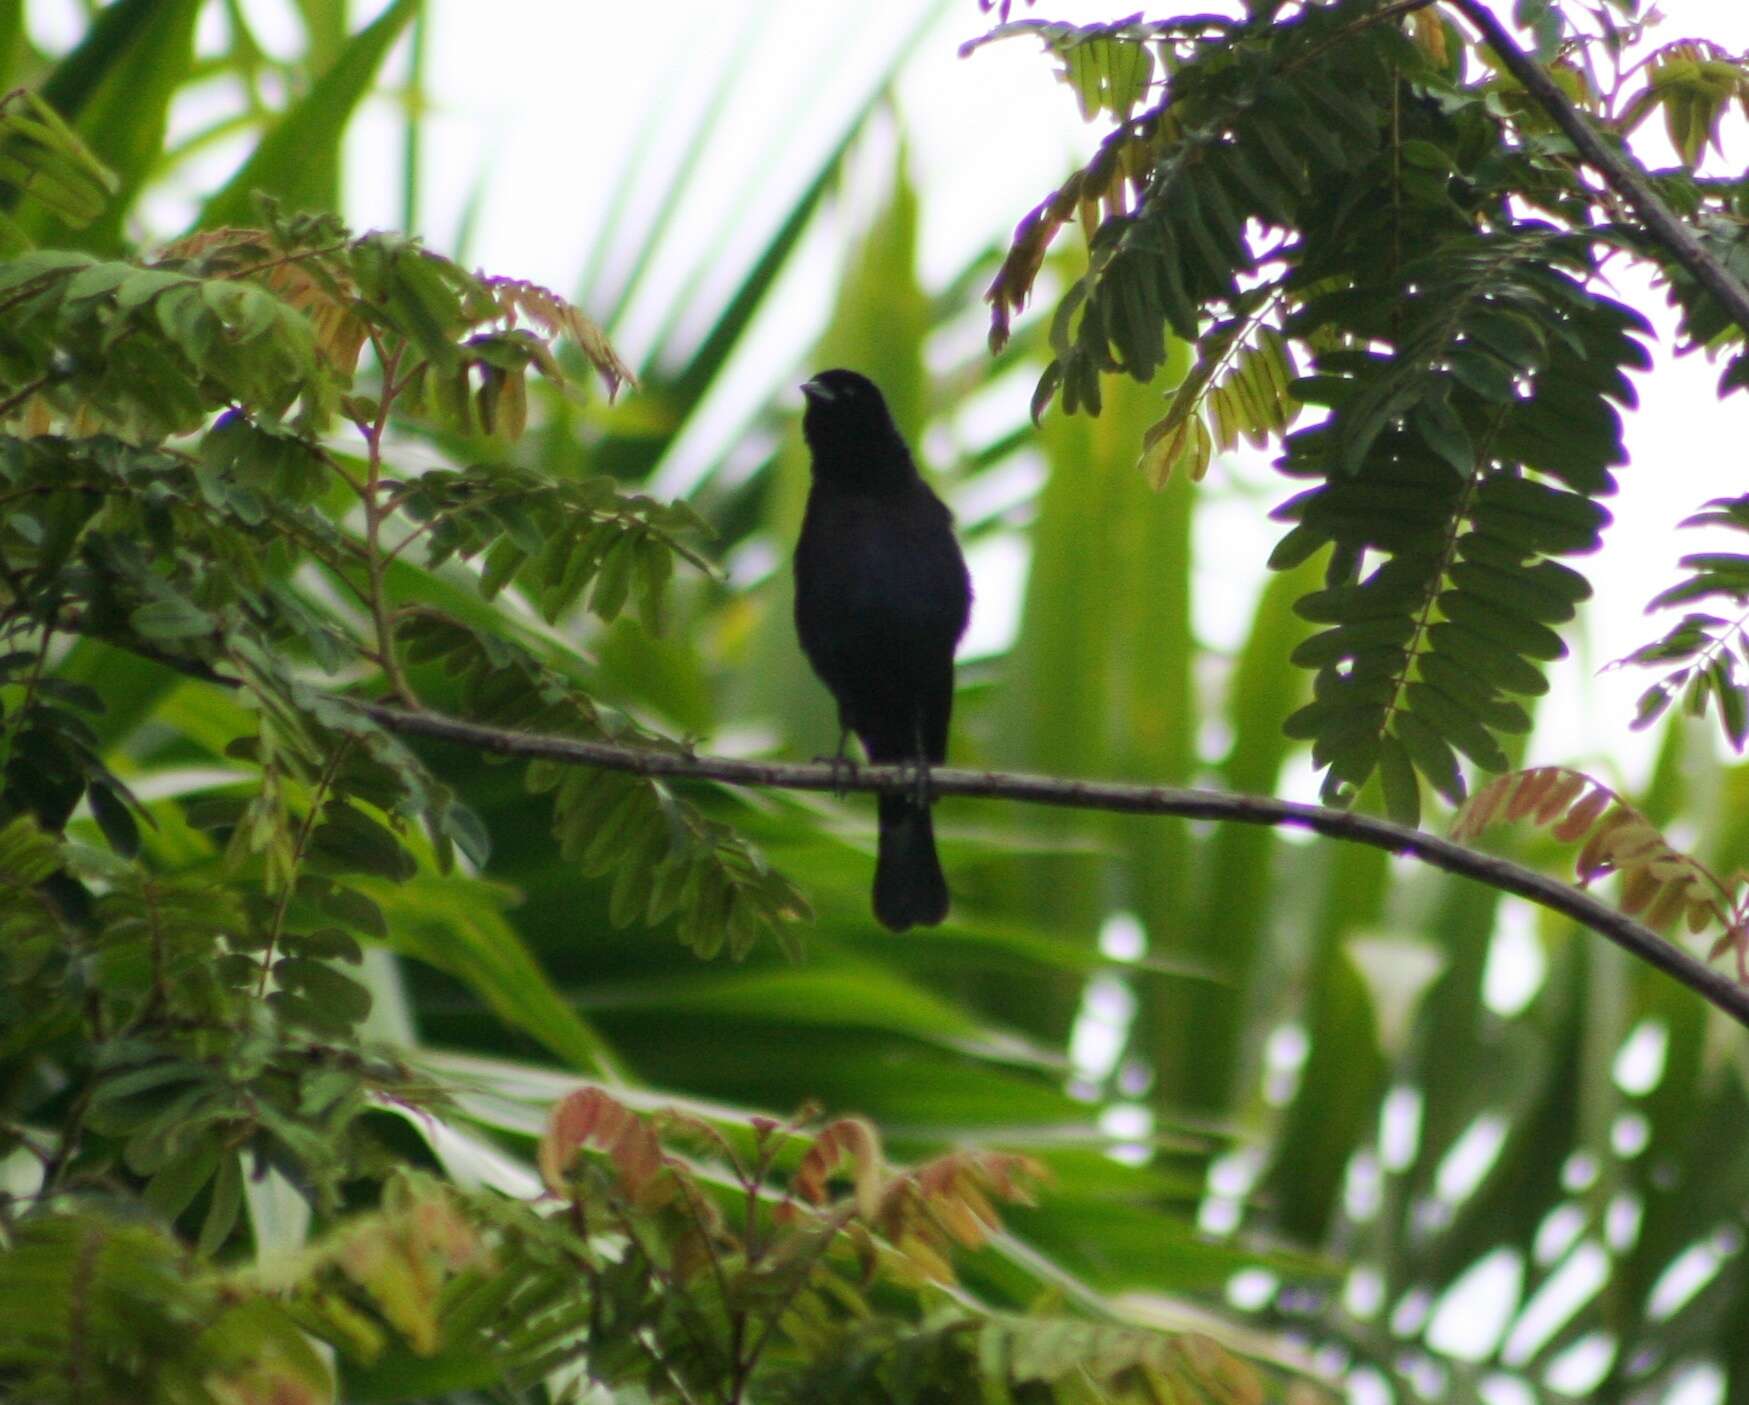 Image of White-lined Tanager